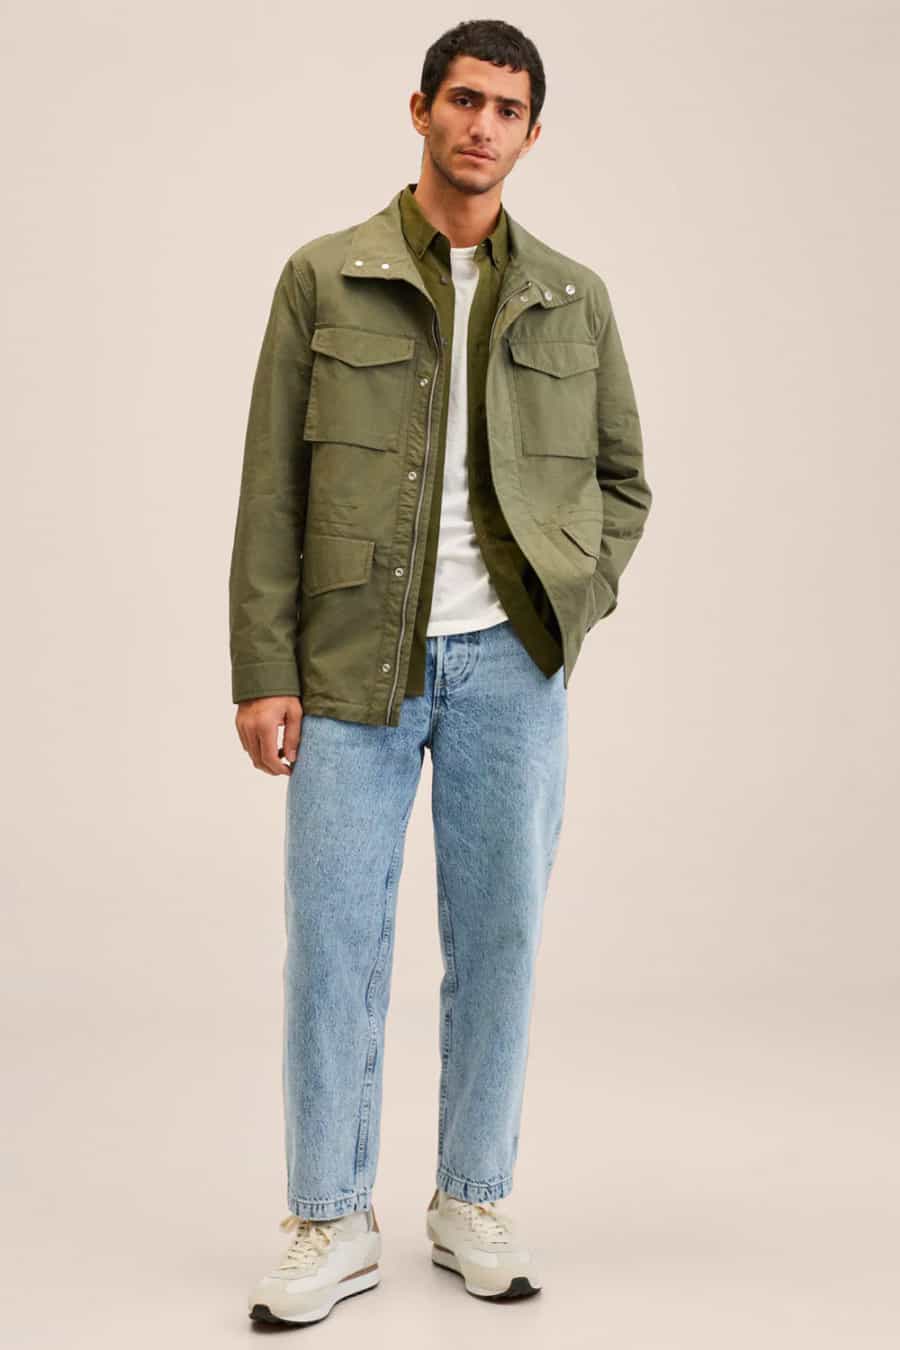 Men's light blue wash jeans, white T-shirt and green field jacket outfit